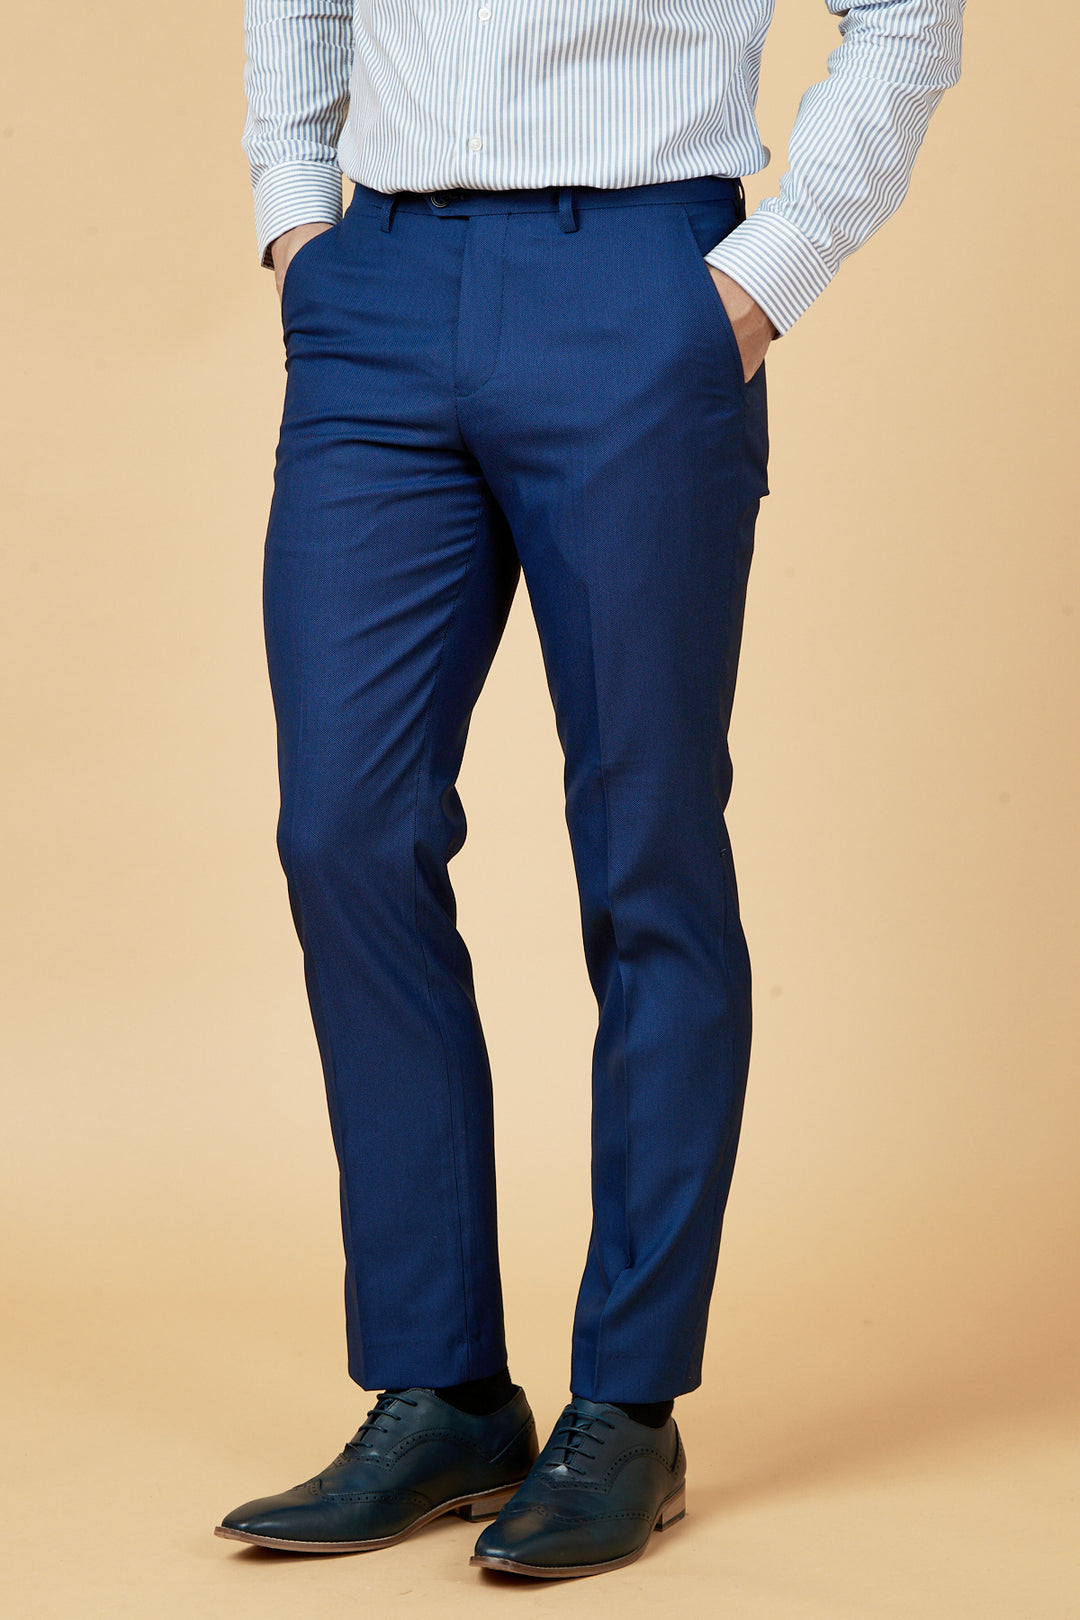 DANNY - Royal Blue Three Piece Suit With Single Breasted Waistcoat